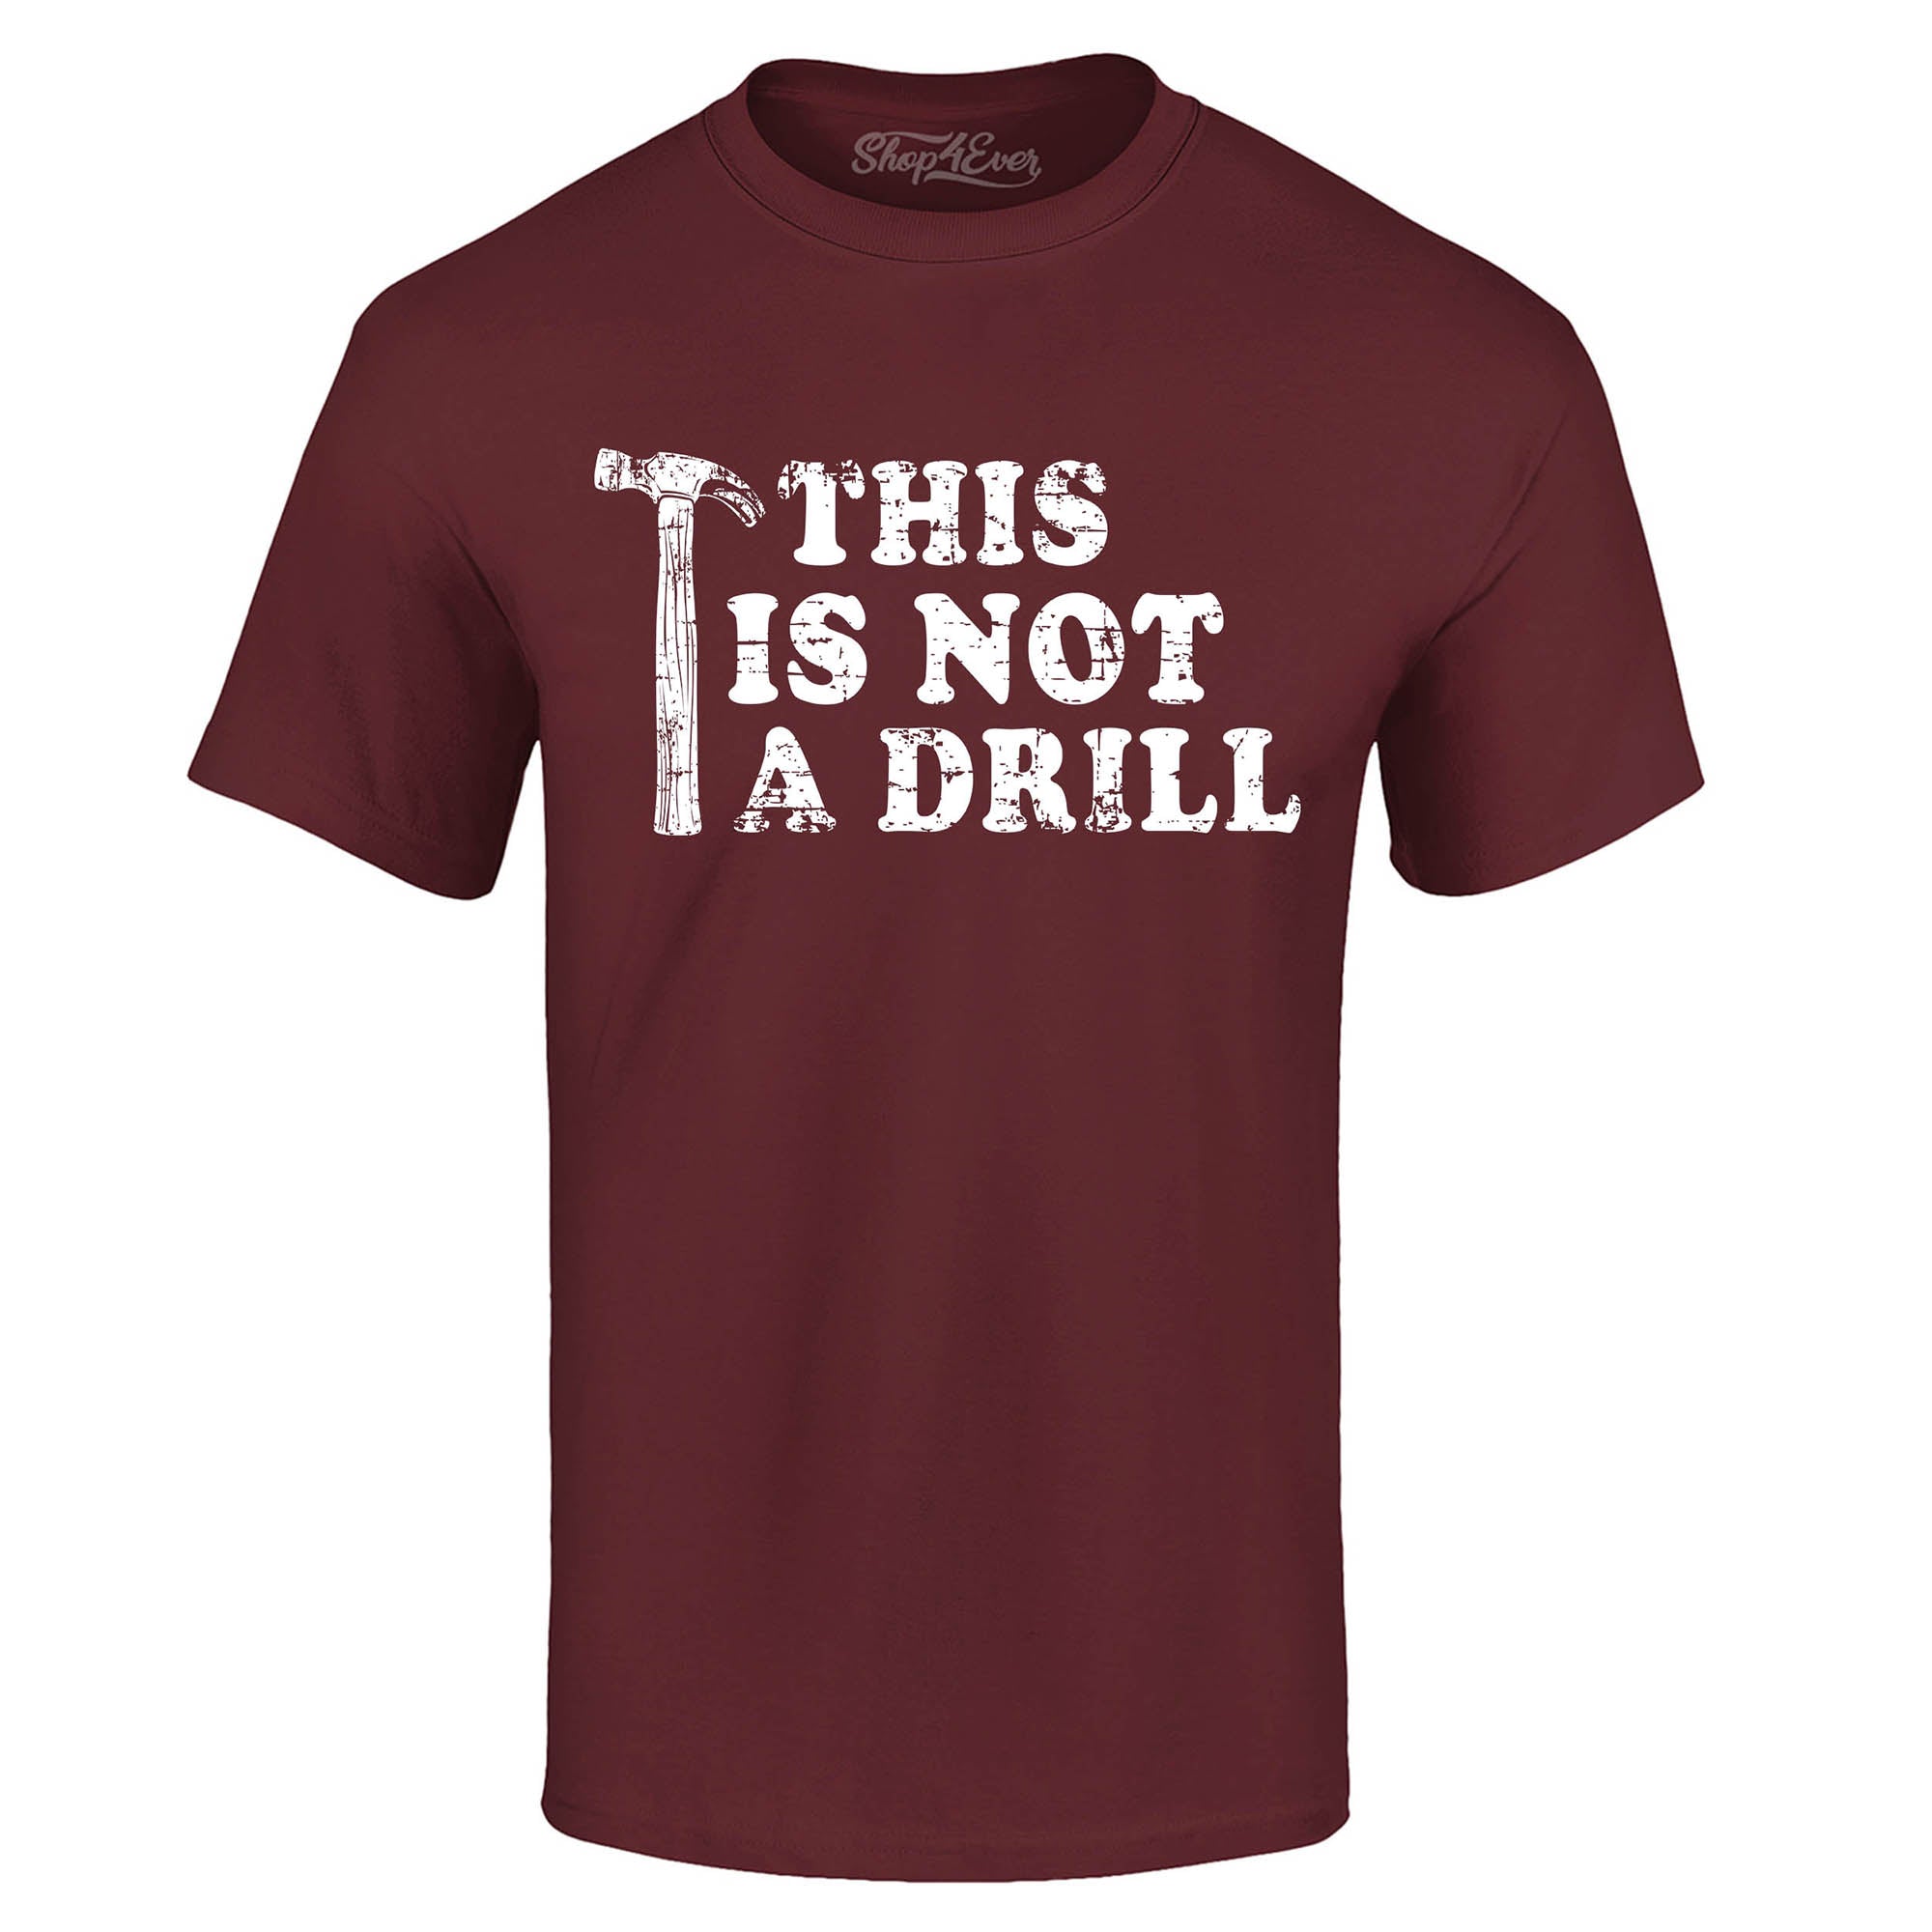 This is Not a Drill T-Shirt Funny Hammer Tool Tee